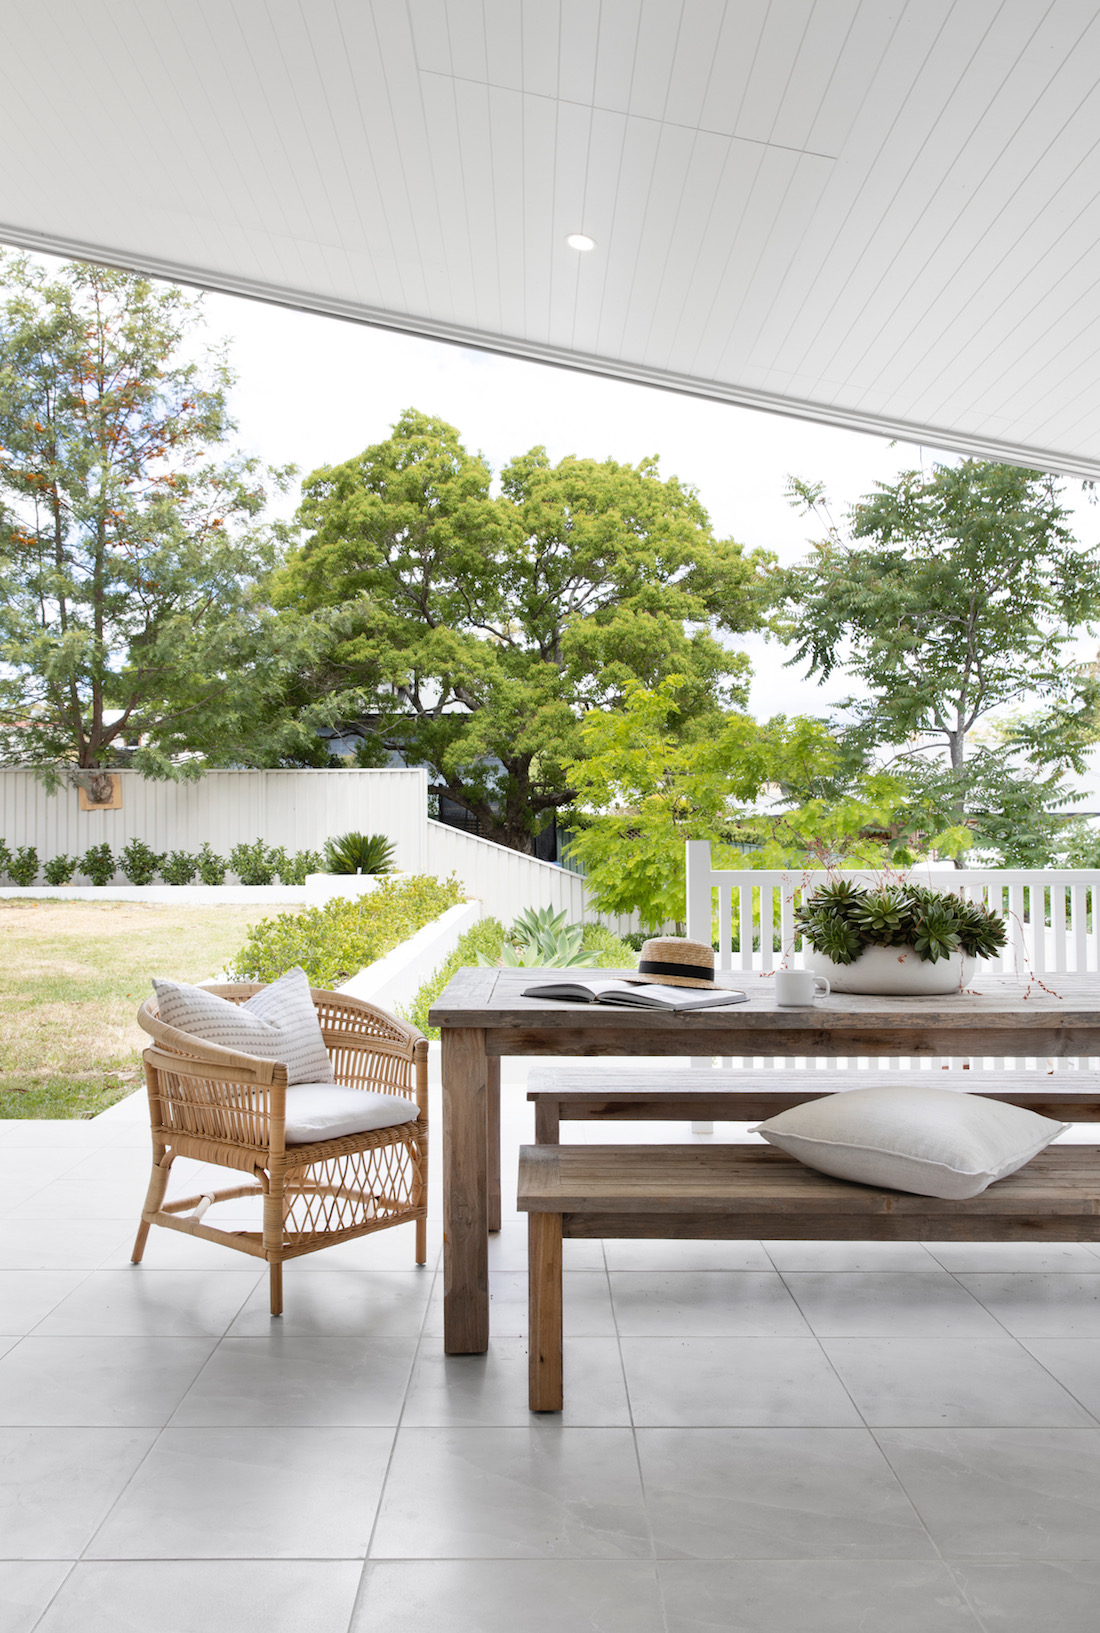 Bench seating for outdoor dining